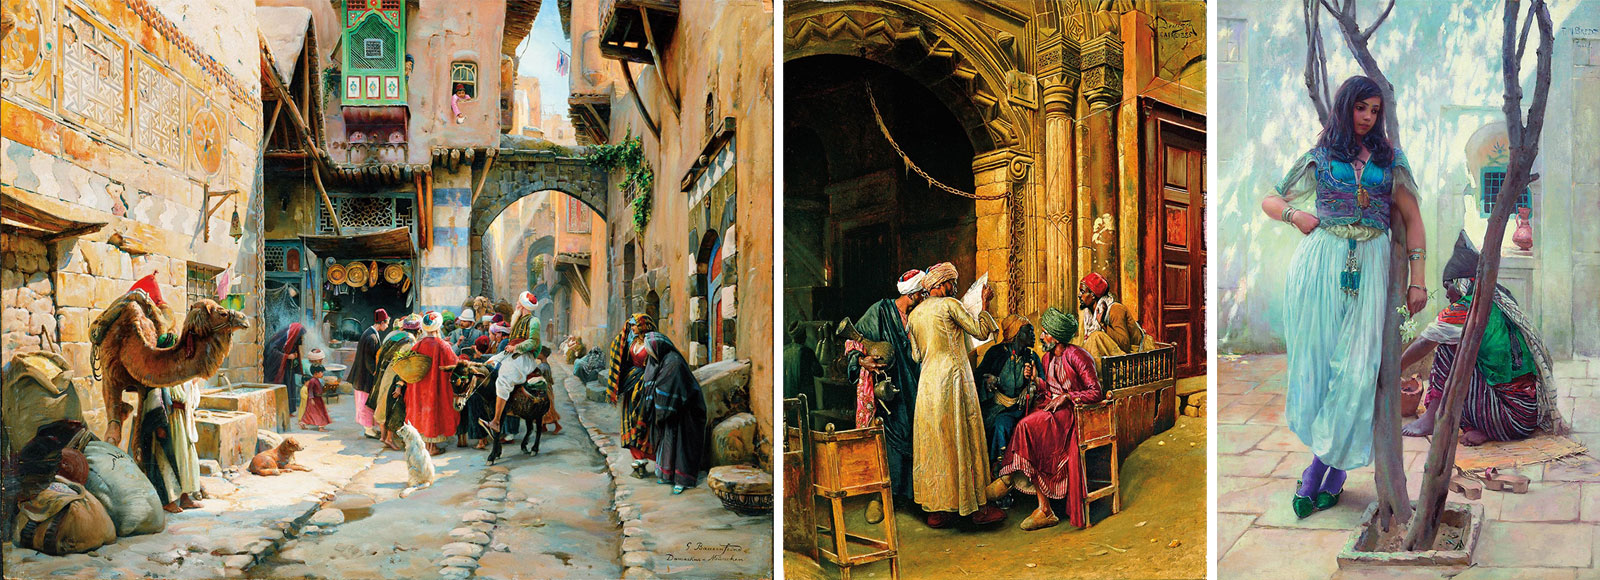 Around 1887 Gustav Bauernfeind, who had trained as an architect, painted himself into the center of a gathering crowd in “A Street Scene, Damascus.” 